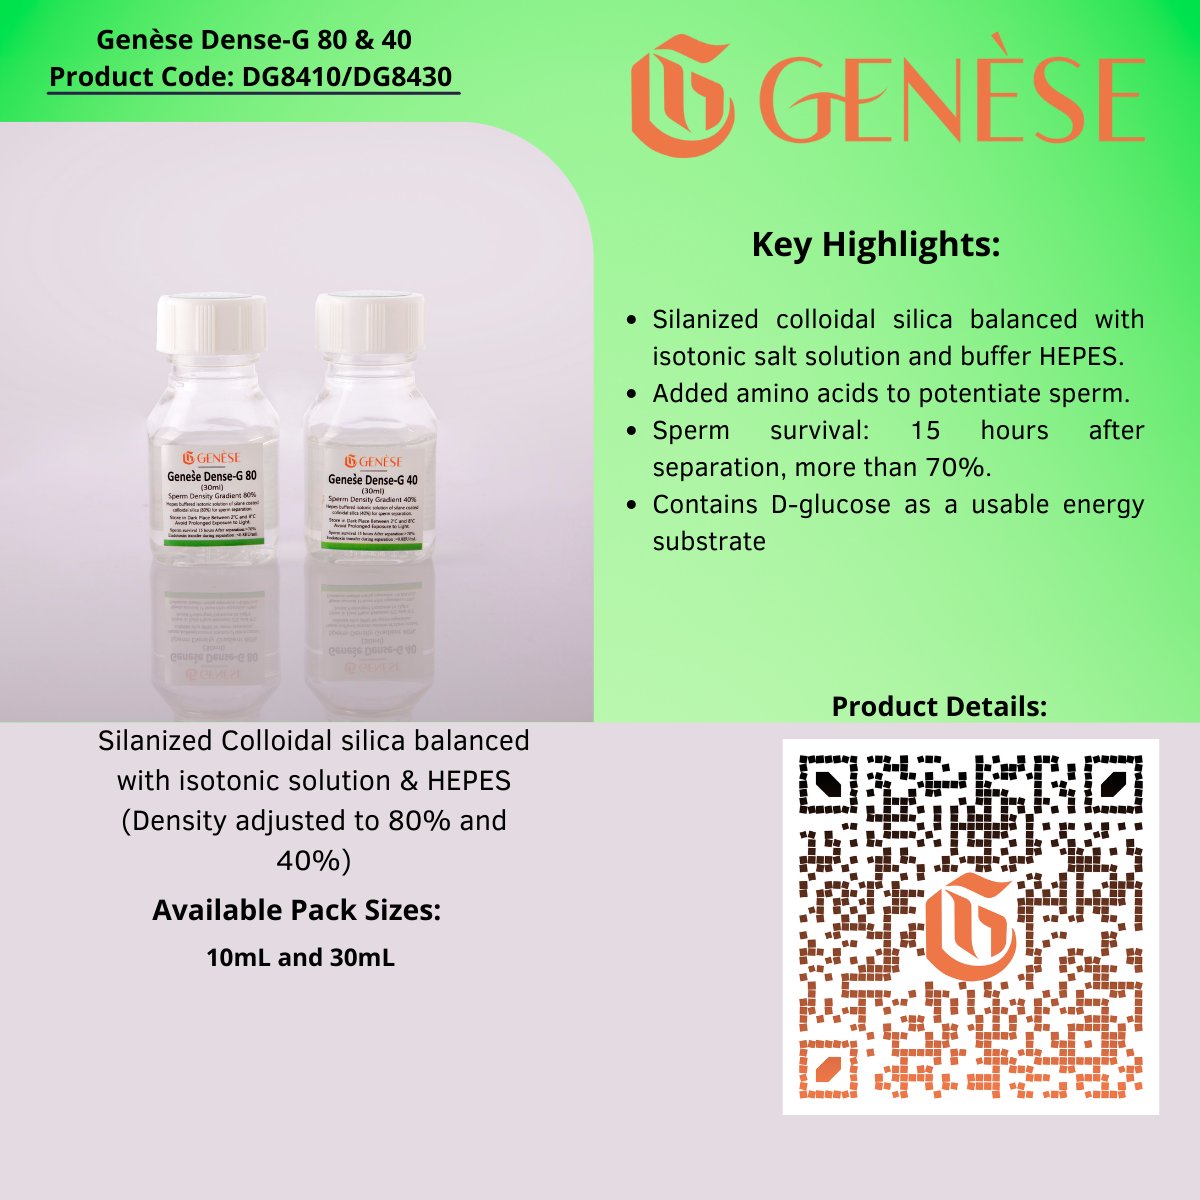 genesebiotique.com

Genèse Dense-G 80 & 40
Sperm Separation Density Gradient -80% & 40%
Silanized Colloidal silica balanced with isotonic solution & HEPES. (Density adjusted to 80% and 40%)

#ivfcentre #ivfsuccess #ivfjourney #ivfclinic #ivfsupport #ivfcommunity